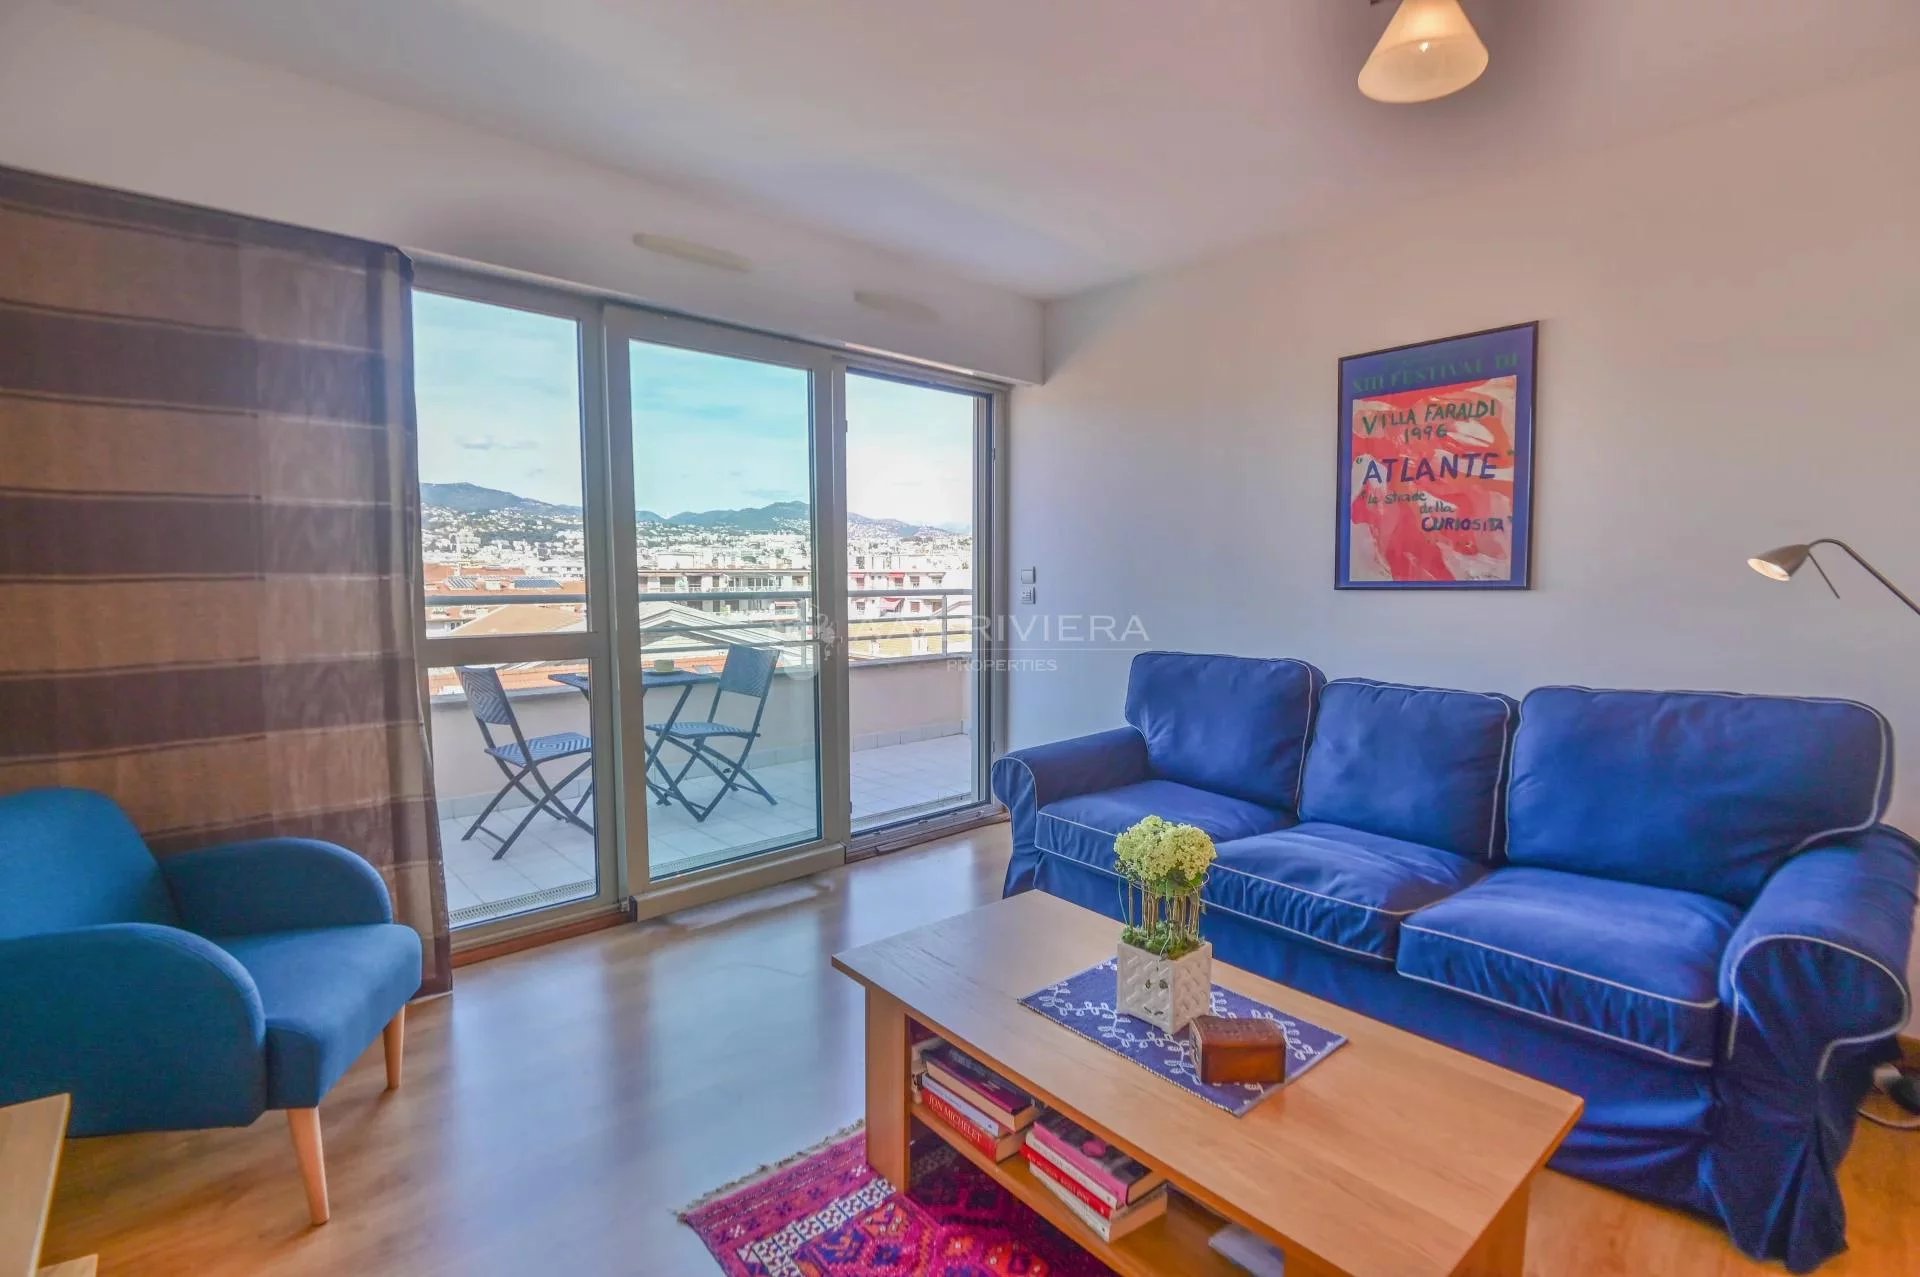 SOLD - SOLE AGENT  - Nice Carré d'Or - Bright 3 room top floor apt with terraces and panoramic view